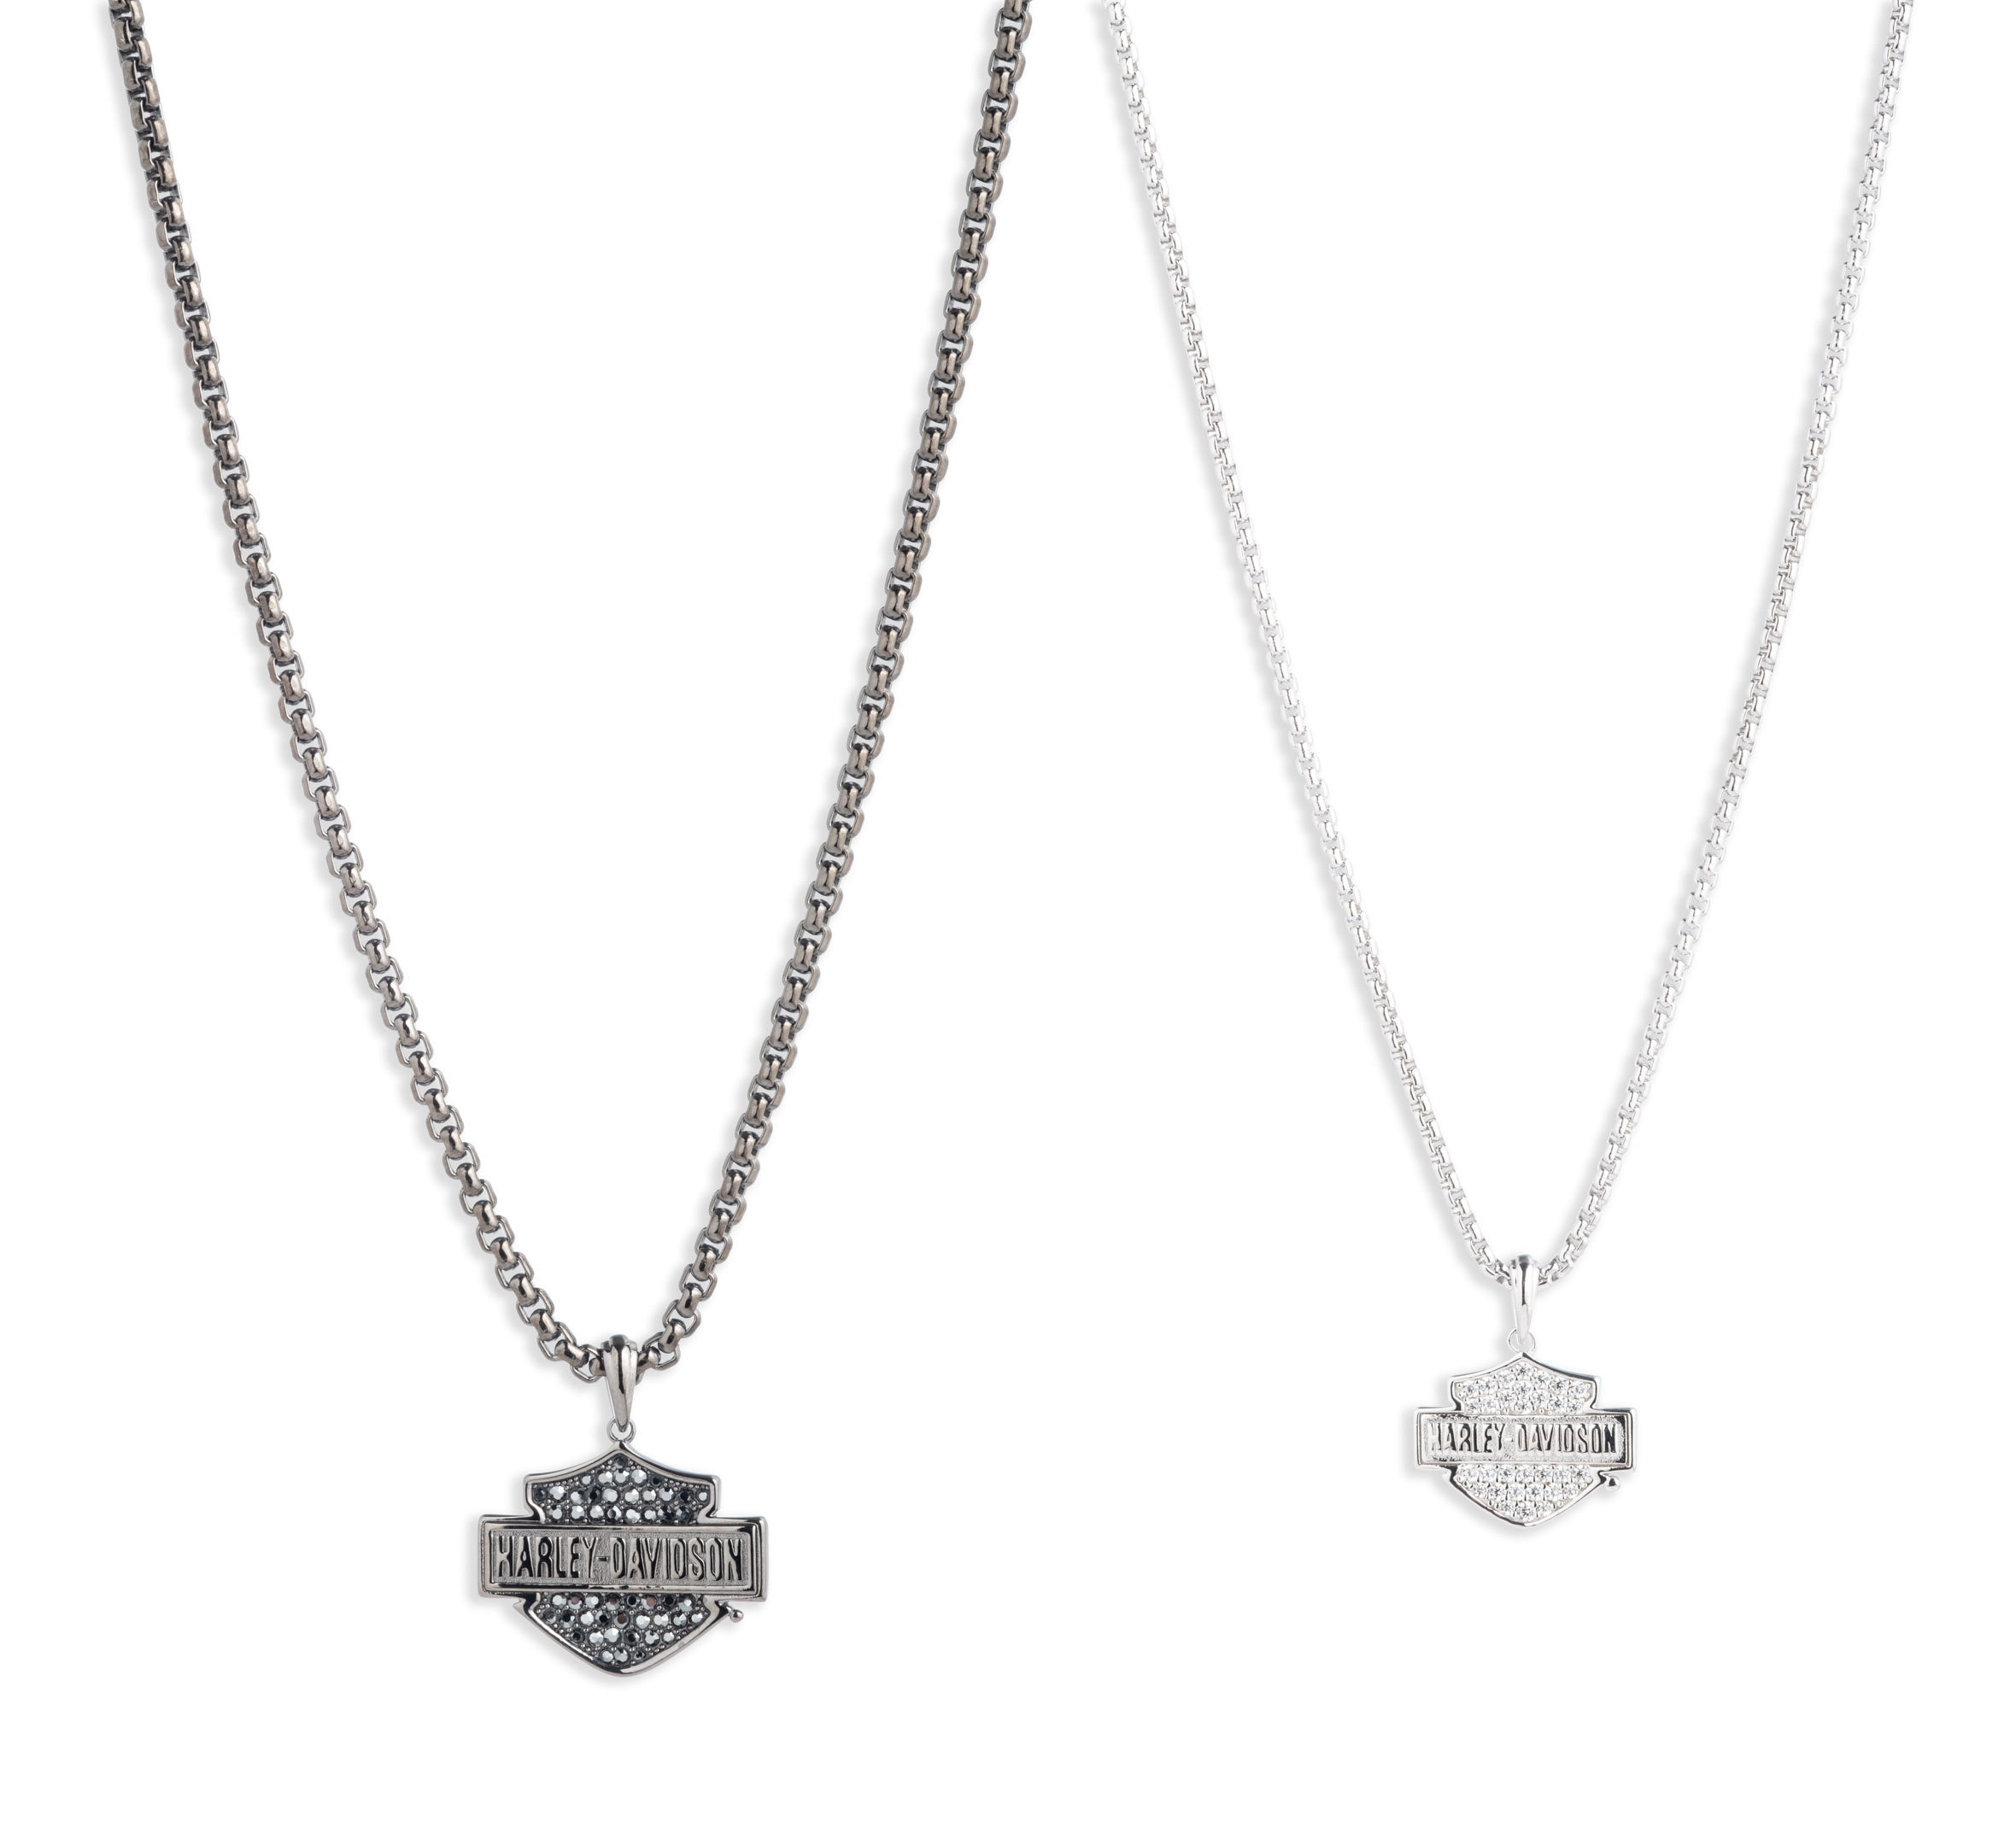 Women's Motorcycle Necklaces | Harley-Davidson USA